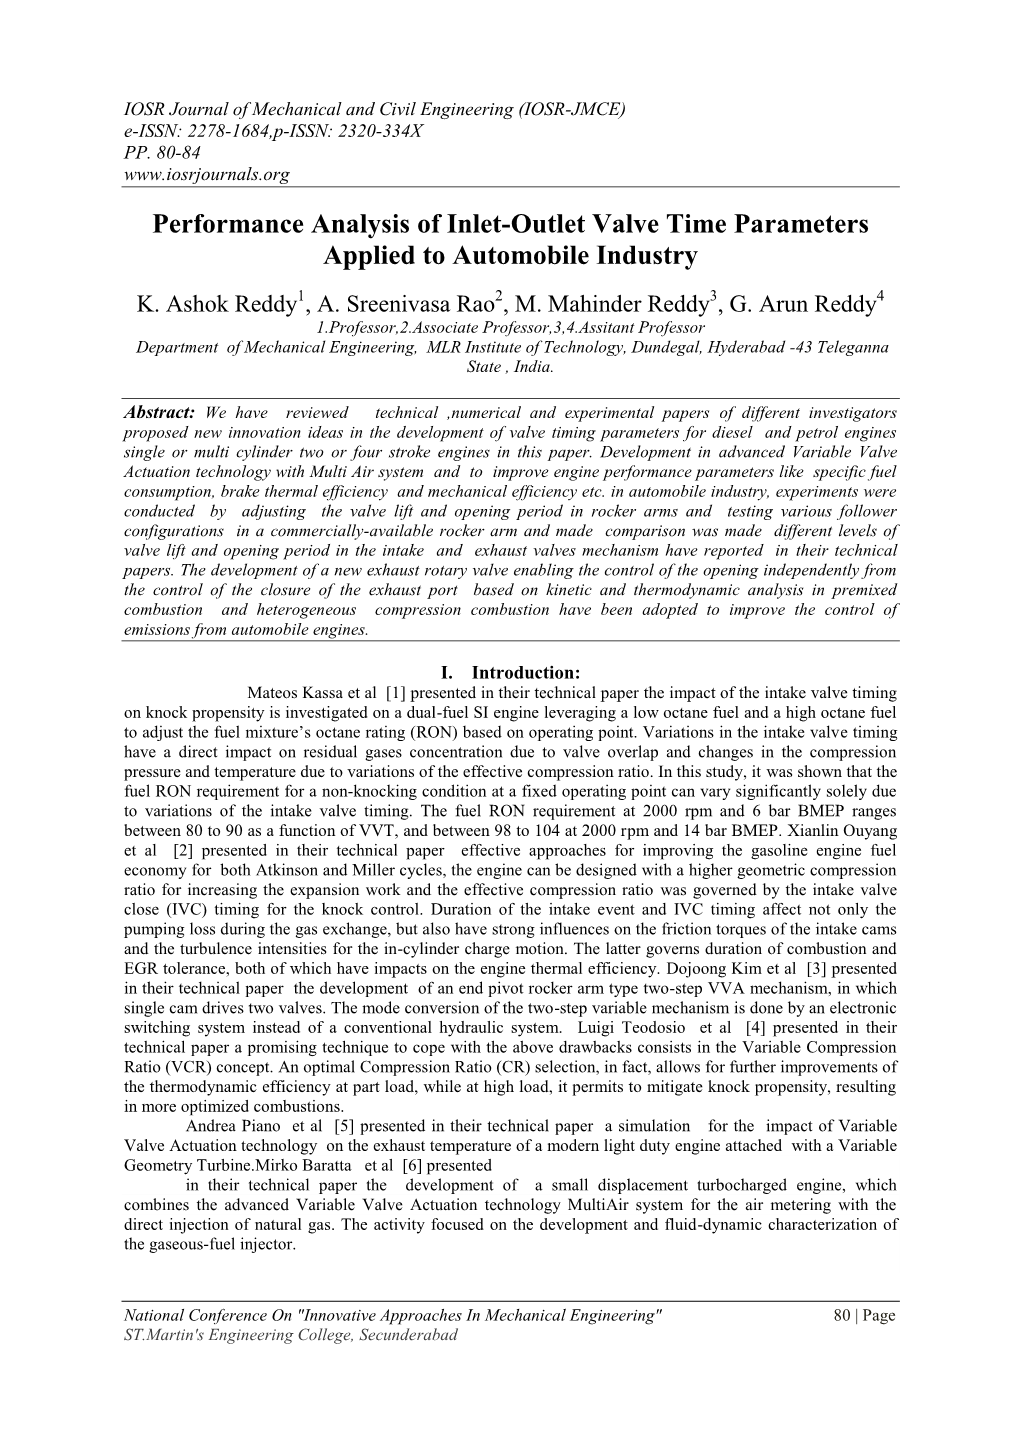 Performance Analysis of Inlet-Outlet Valve Time Parameters Applied to Automobile Industry